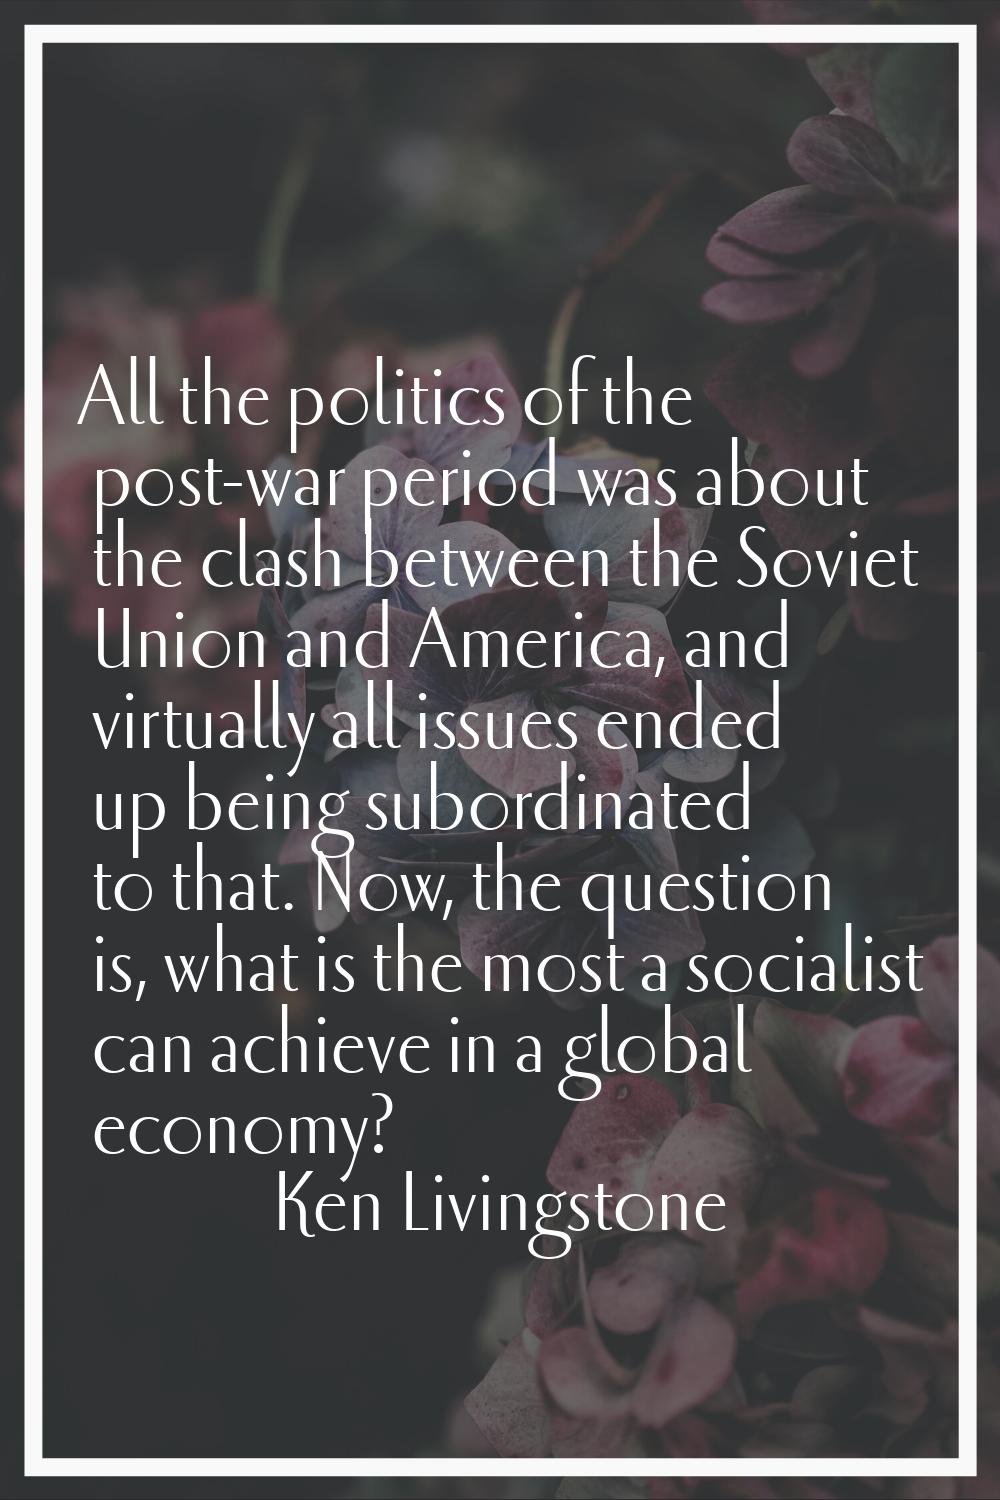 All the politics of the post-war period was about the clash between the Soviet Union and America, a